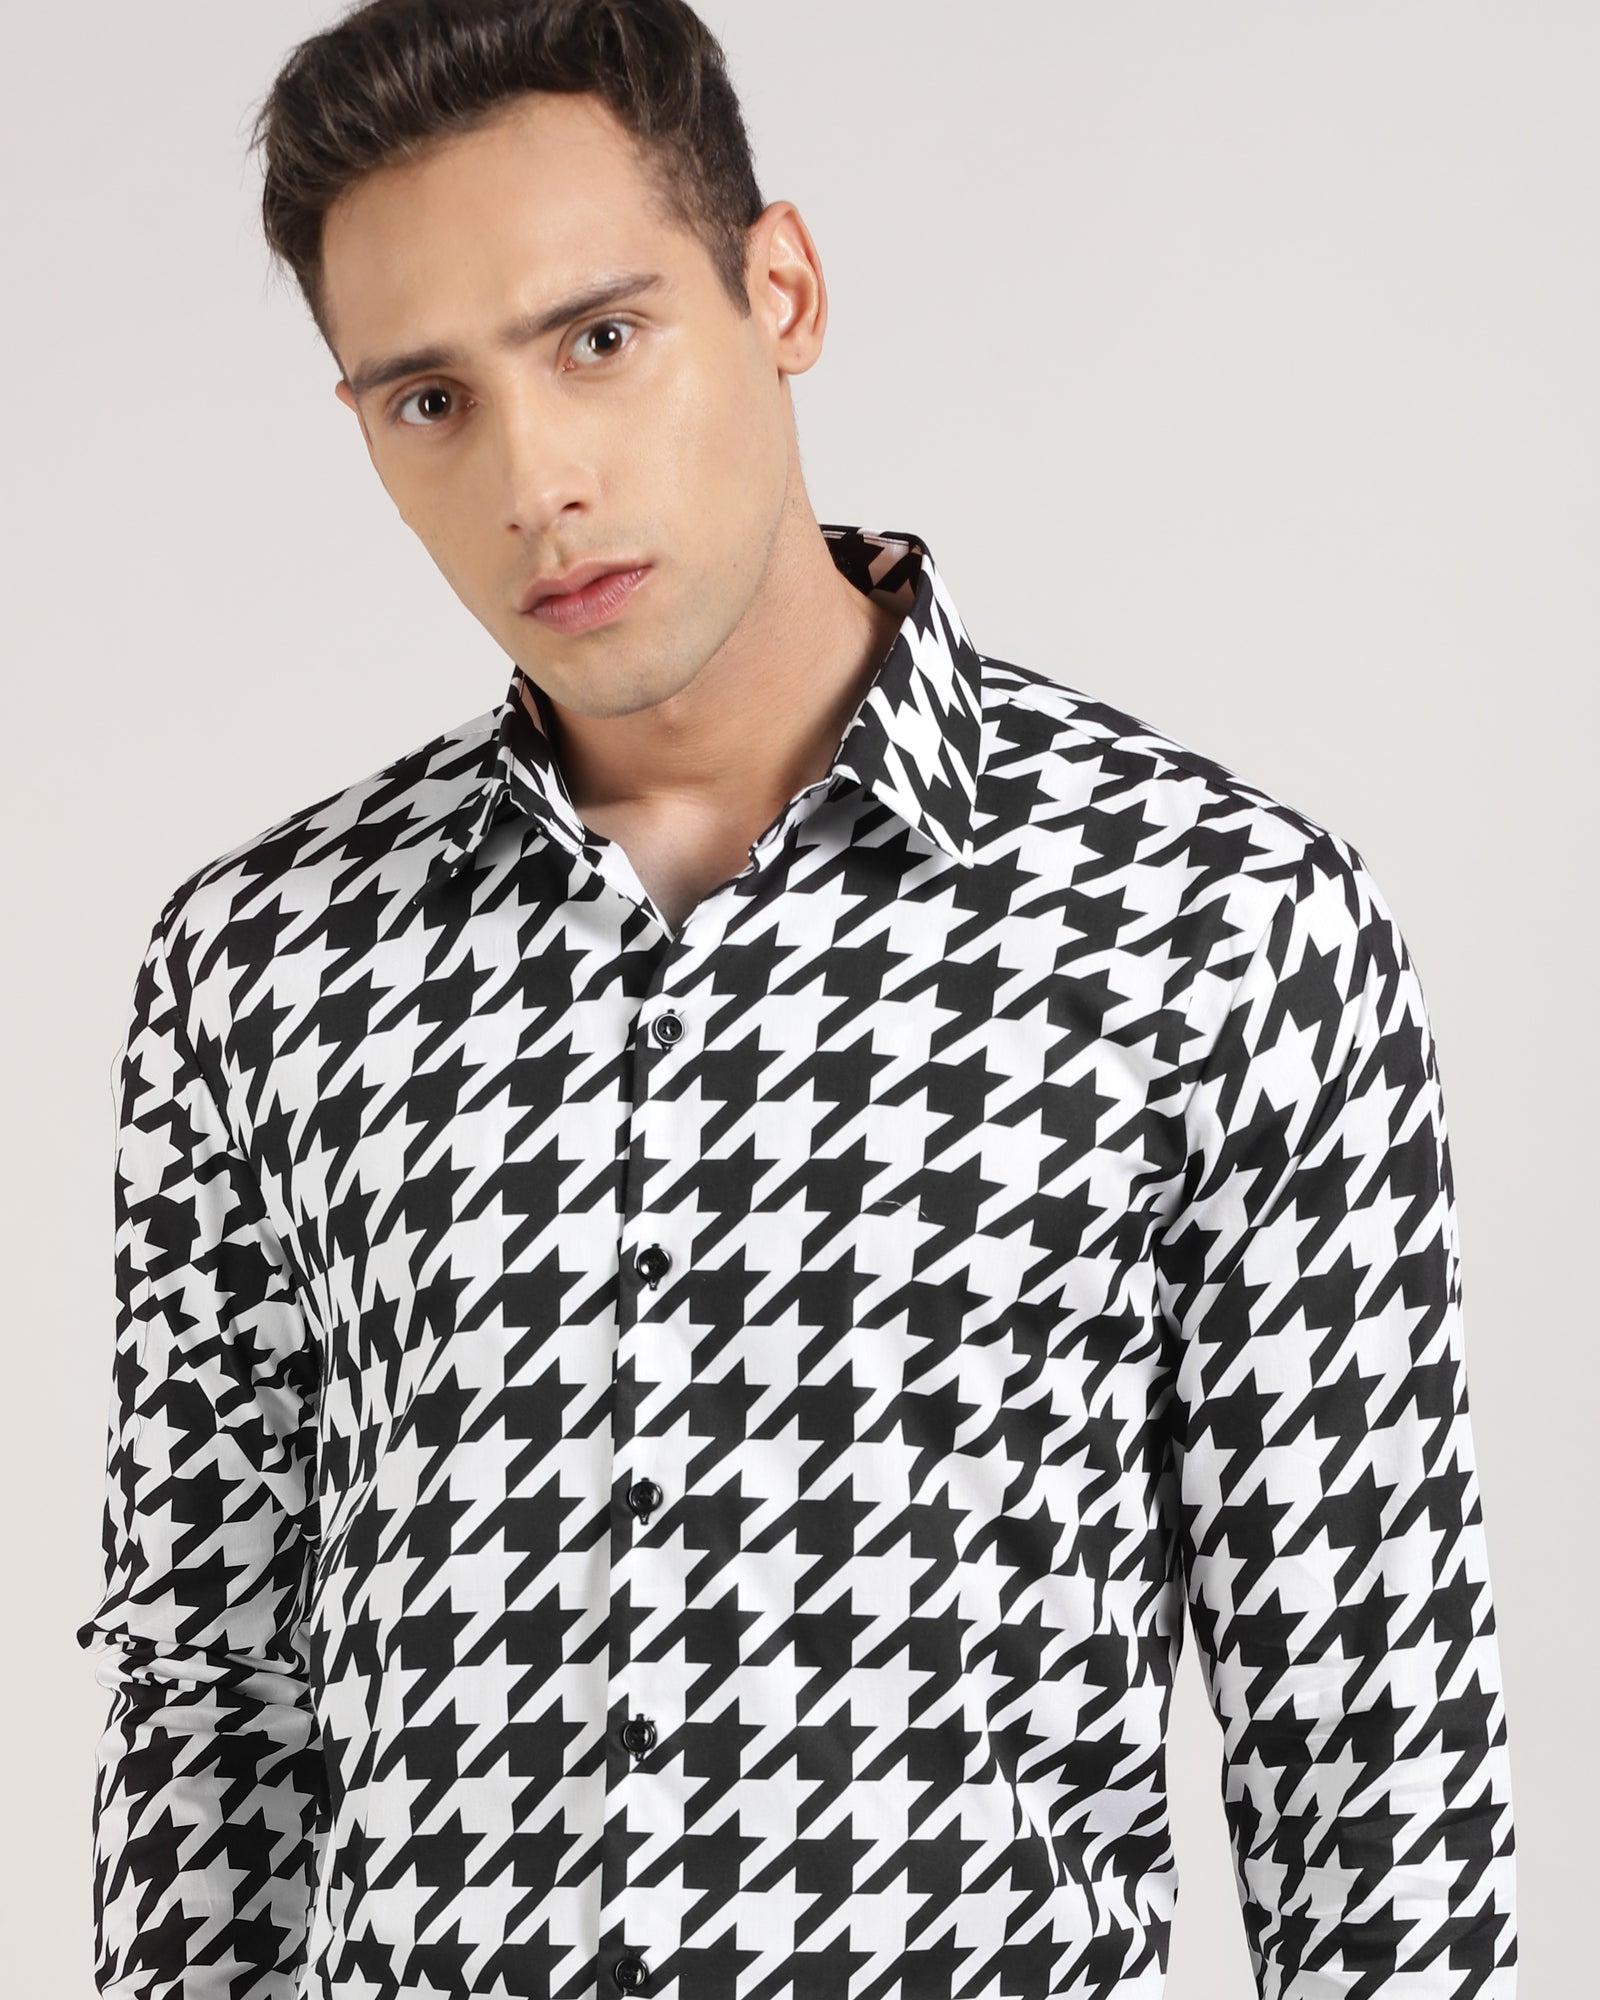 Find Your Perfect Printed Shirt with Houndstooth Pattern – Monsui